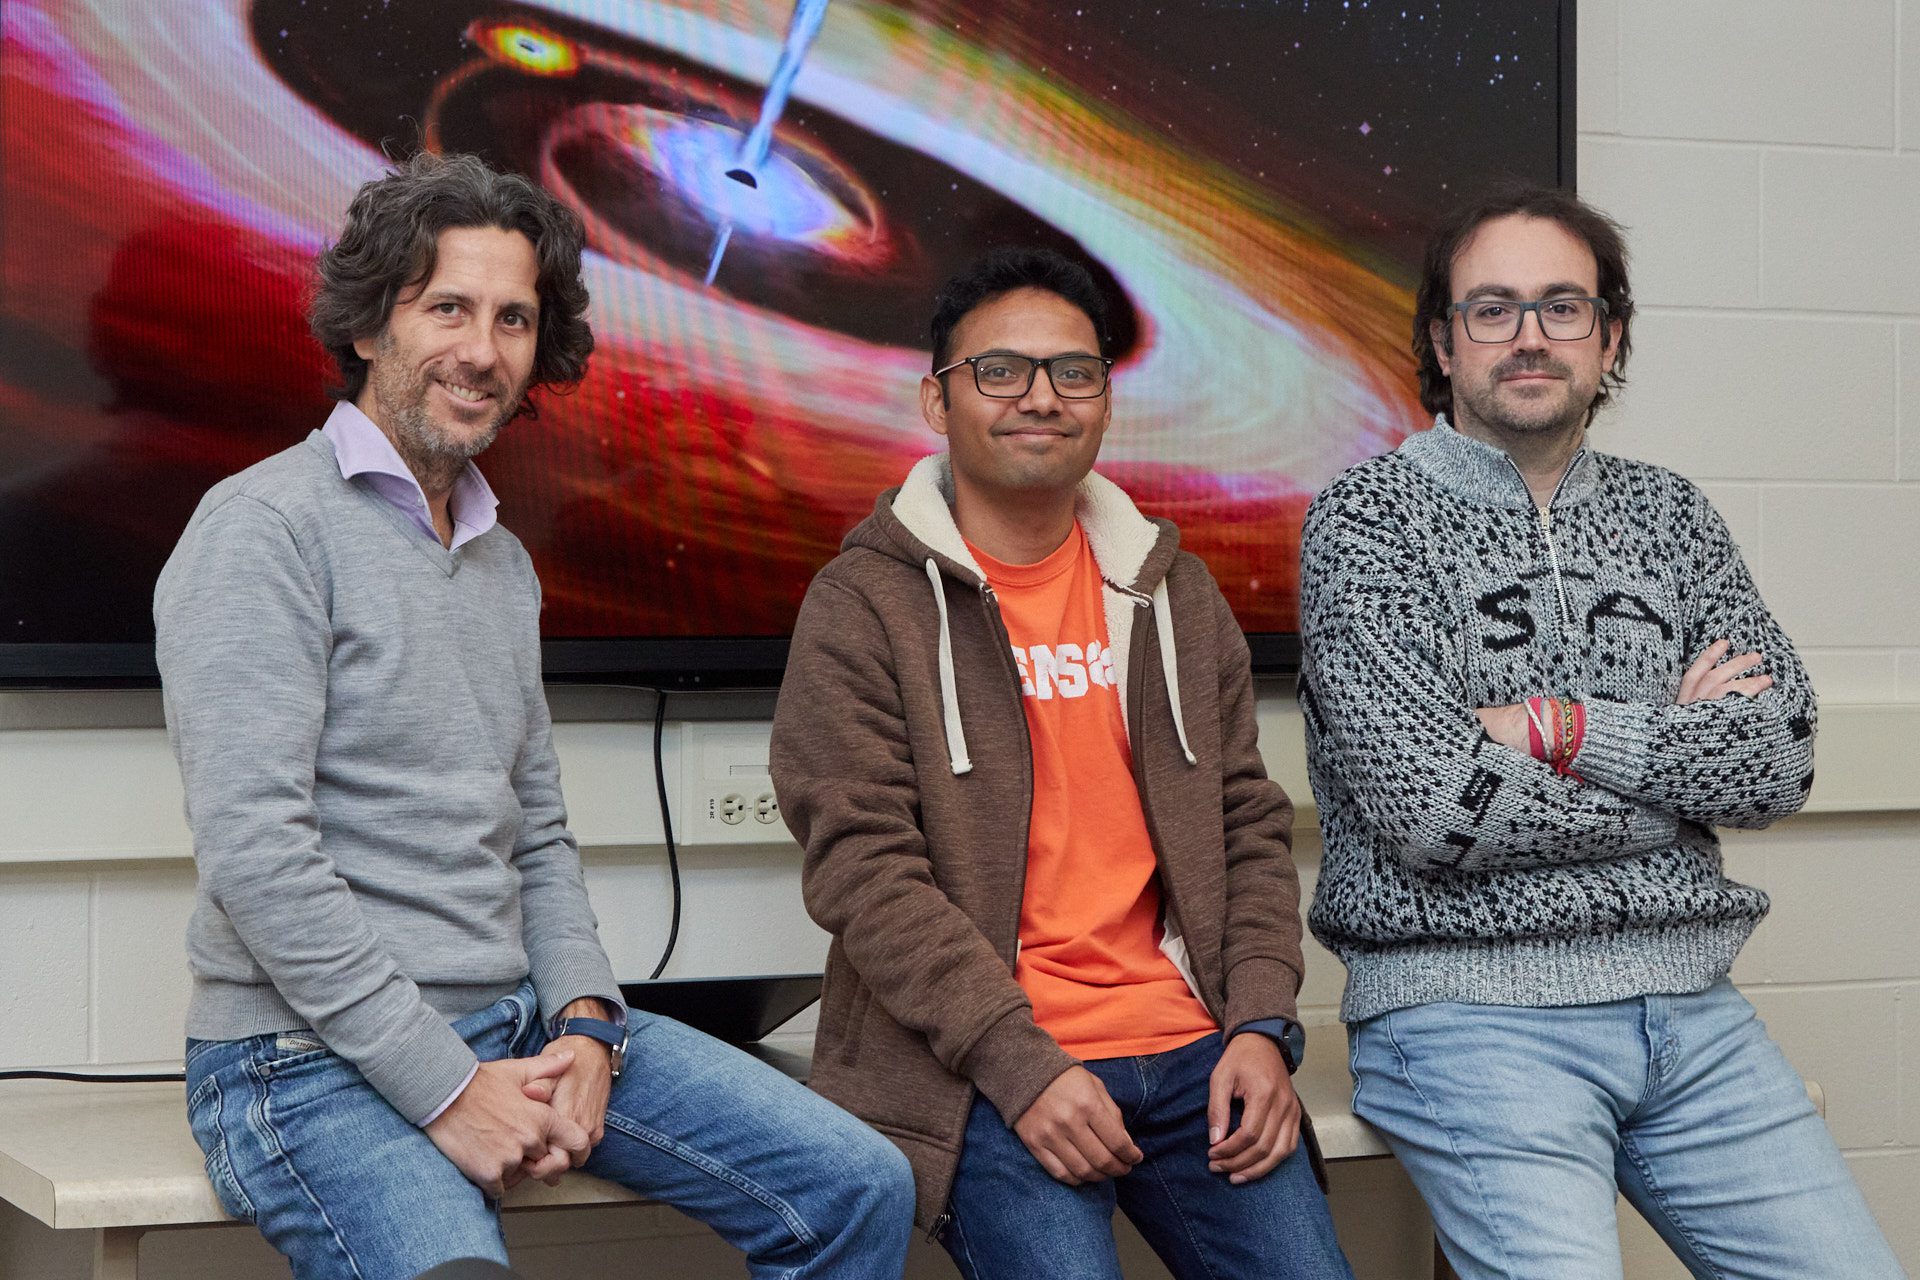 Three men are sitting in front of a photo of a supermassive black hole